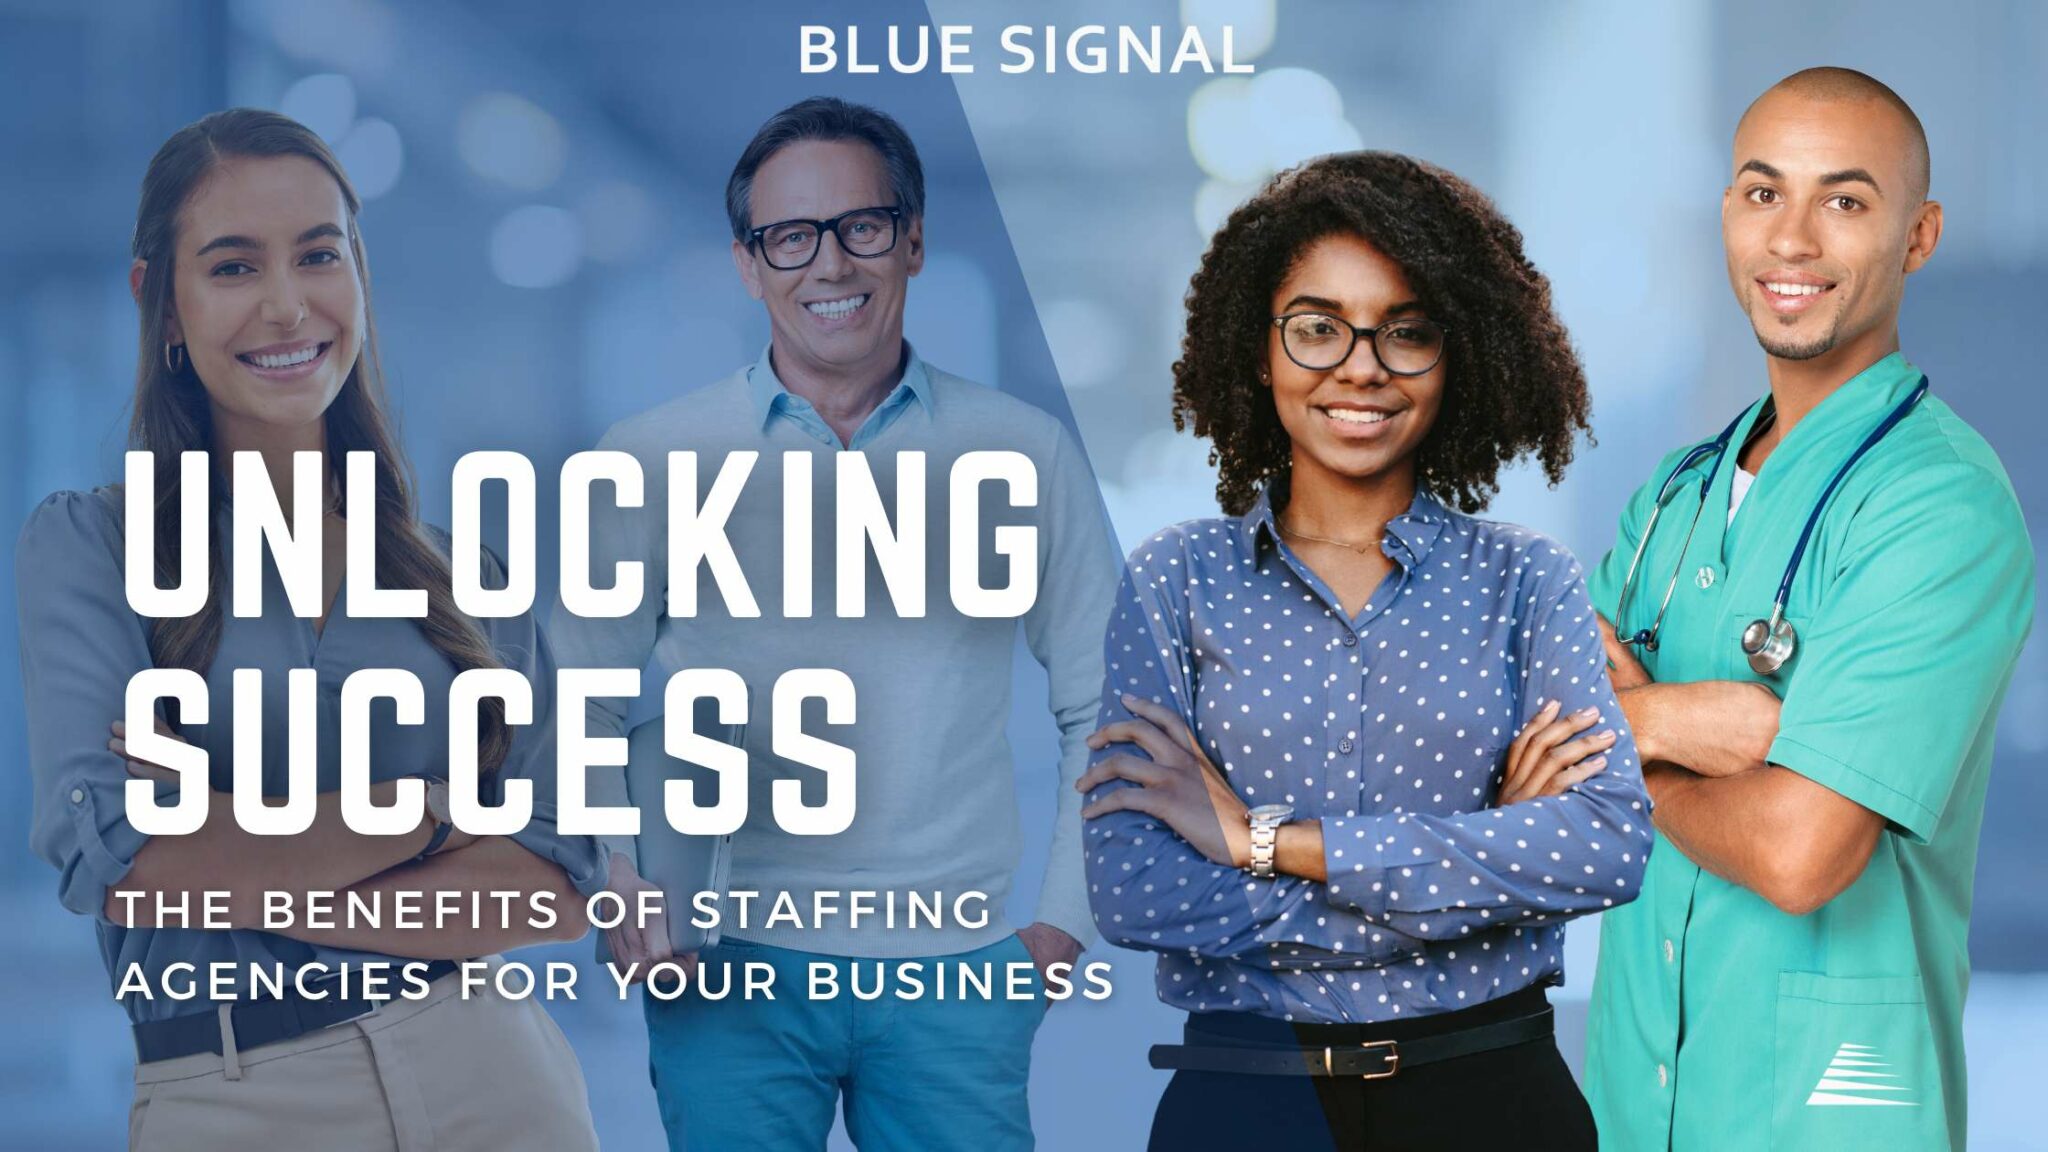 Unlocking Success The Benefits of Staffing Agencies for Your Business